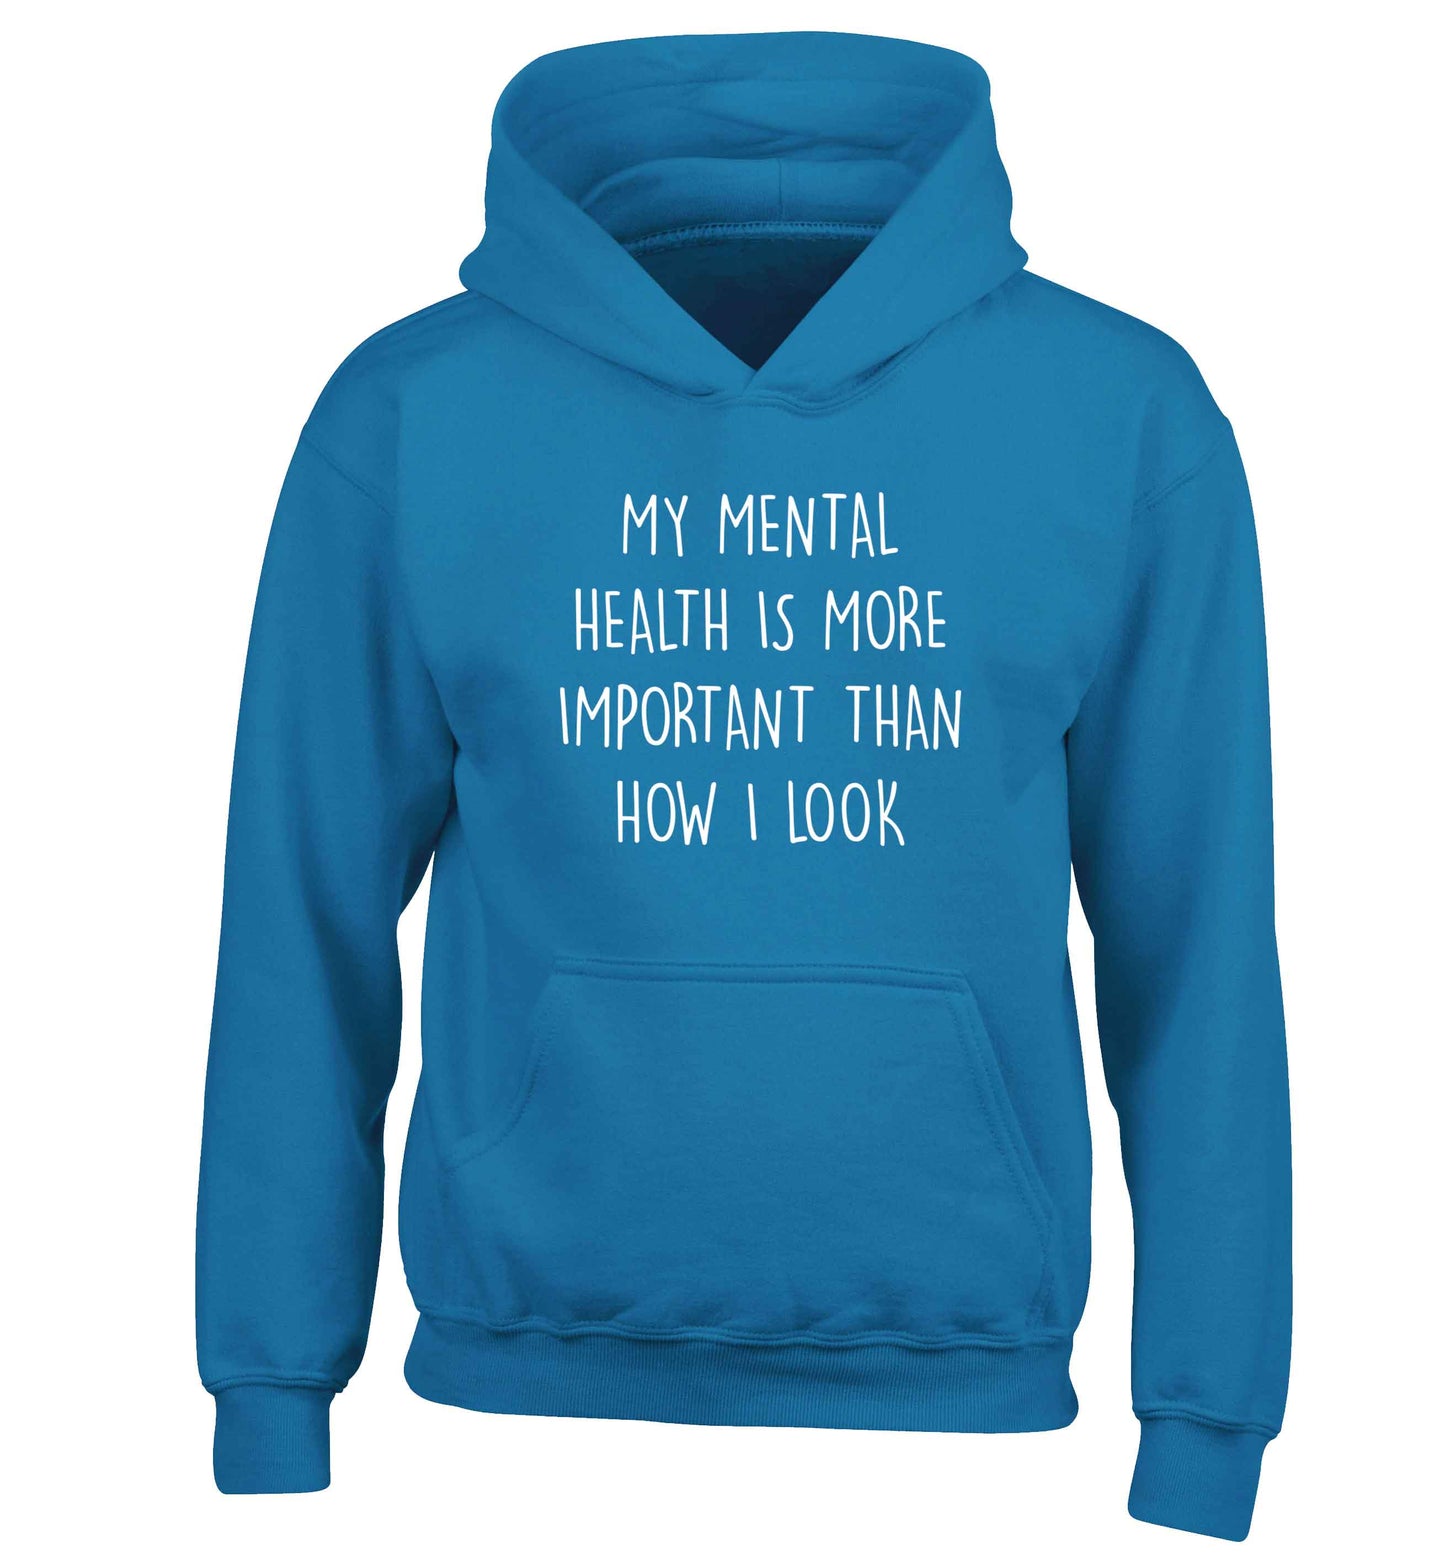 My mental health is more importnat than how I look children's blue hoodie 12-13 Years